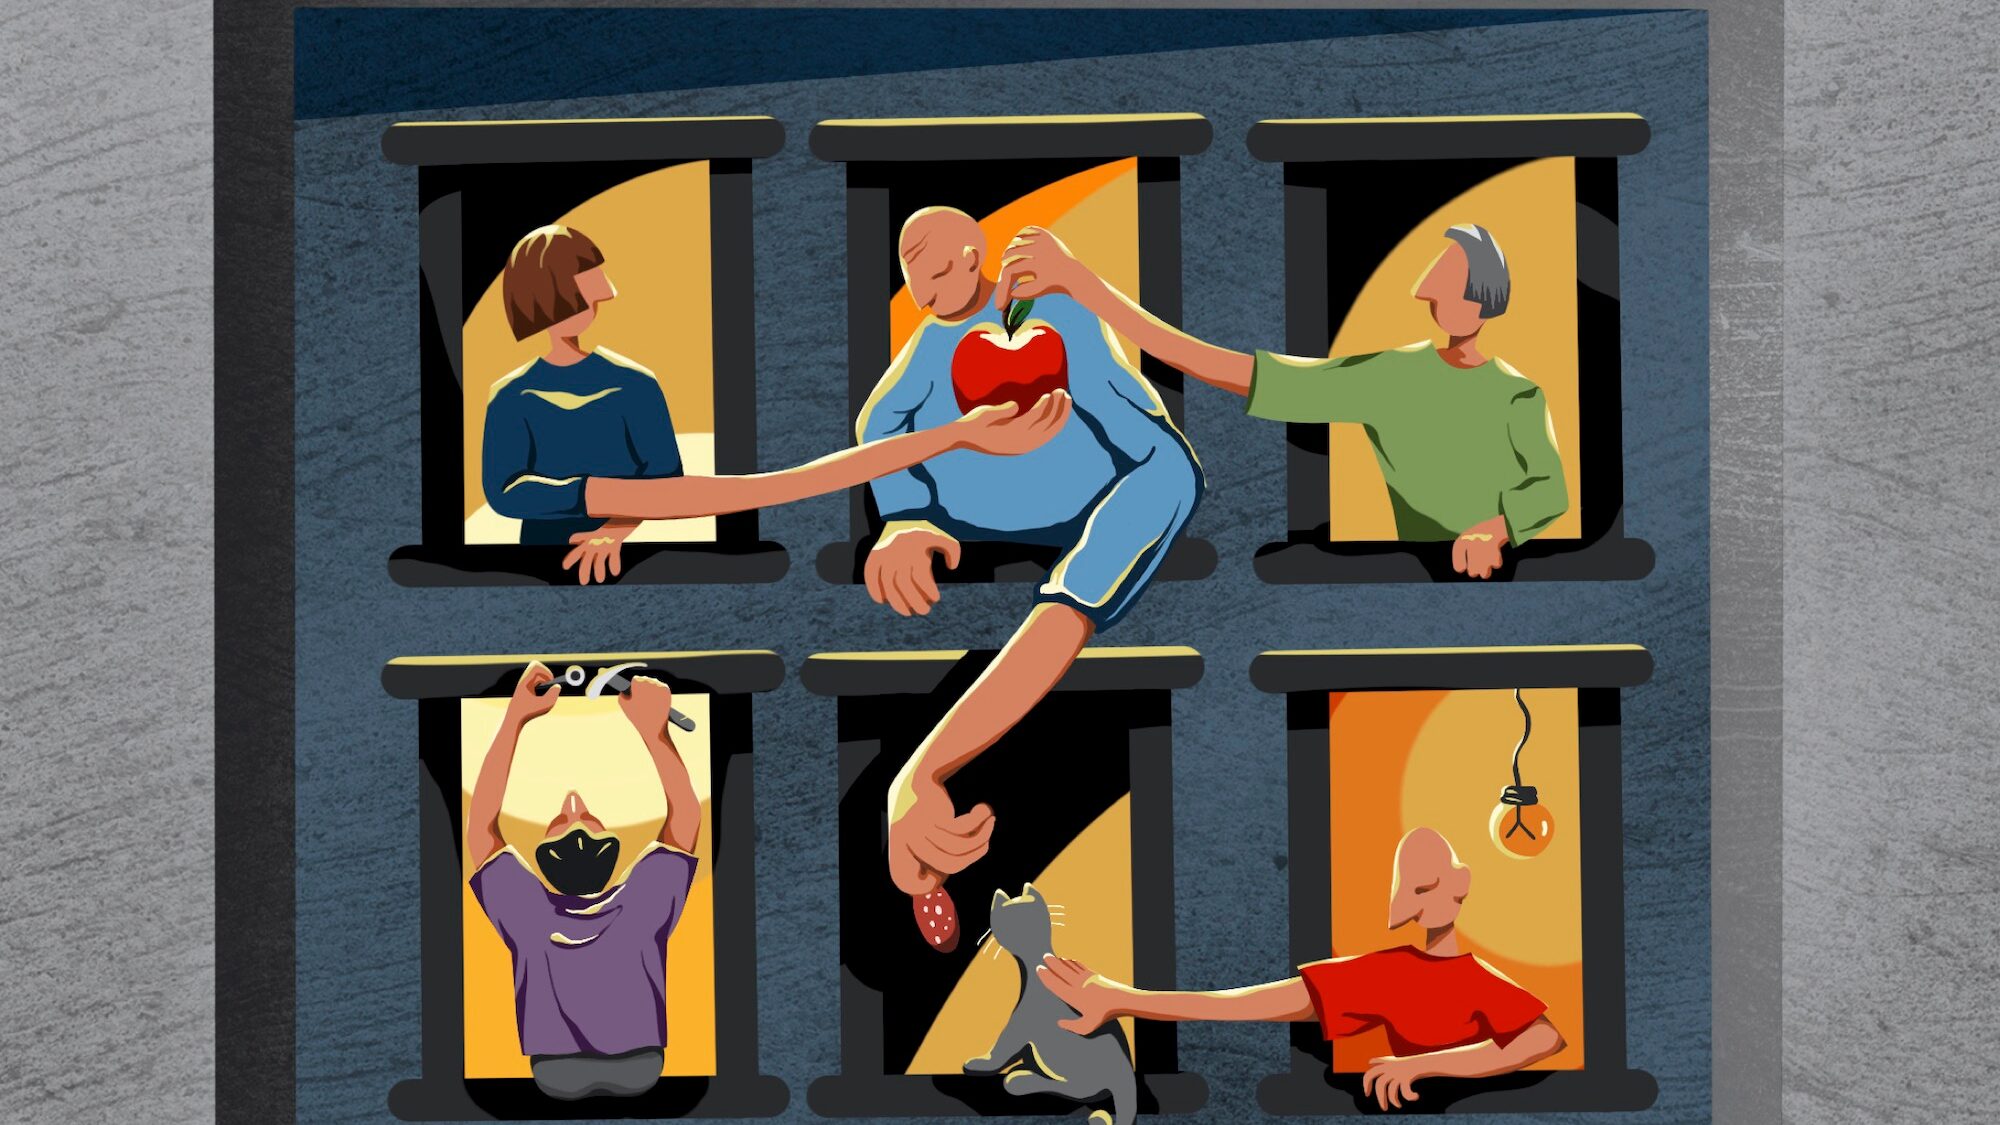 Illustration of people interacting between apartment building windows